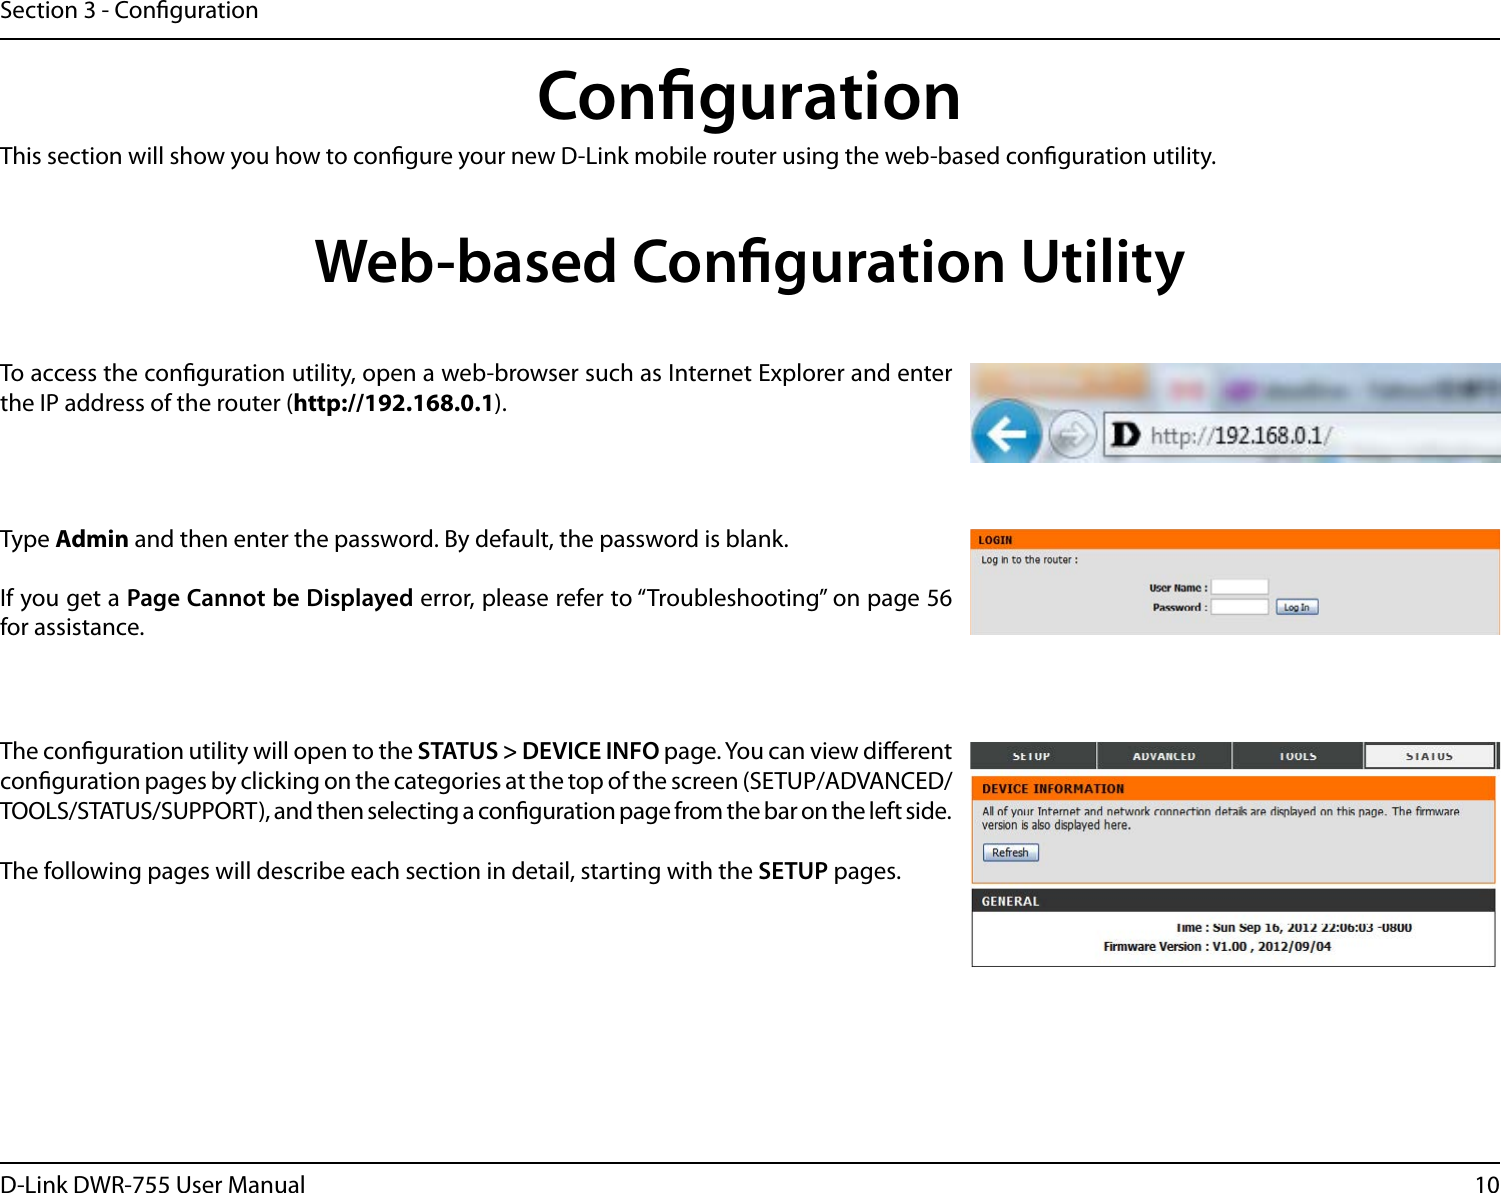 10D-Link DWR-755 User ManualSection 3 - CongurationCongurationThis section will show you how to congure your new D-Link mobile router using the web-based conguration utility.Web-based Conguration UtilityTo access the conguration utility, open a web-browser such as Internet Explorer and enter the IP address of the router (http://192.168.0.1).Type Admin and then enter the password. By default, the password is blank.If you get a Page Cannot be Displayed error, please refer to “Troubleshooting” on page 56 for assistance.The conguration utility will open to the STATUS &gt; DEVICE INFO page. You can view dierent conguration pages by clicking on the categories at the top of the screen (SETUP/ADVANCED/TOOLS/STATUS/SUPPORT), and then selecting a conguration page from the bar on the left side.The following pages will describe each section in detail, starting with the SETUP pages.